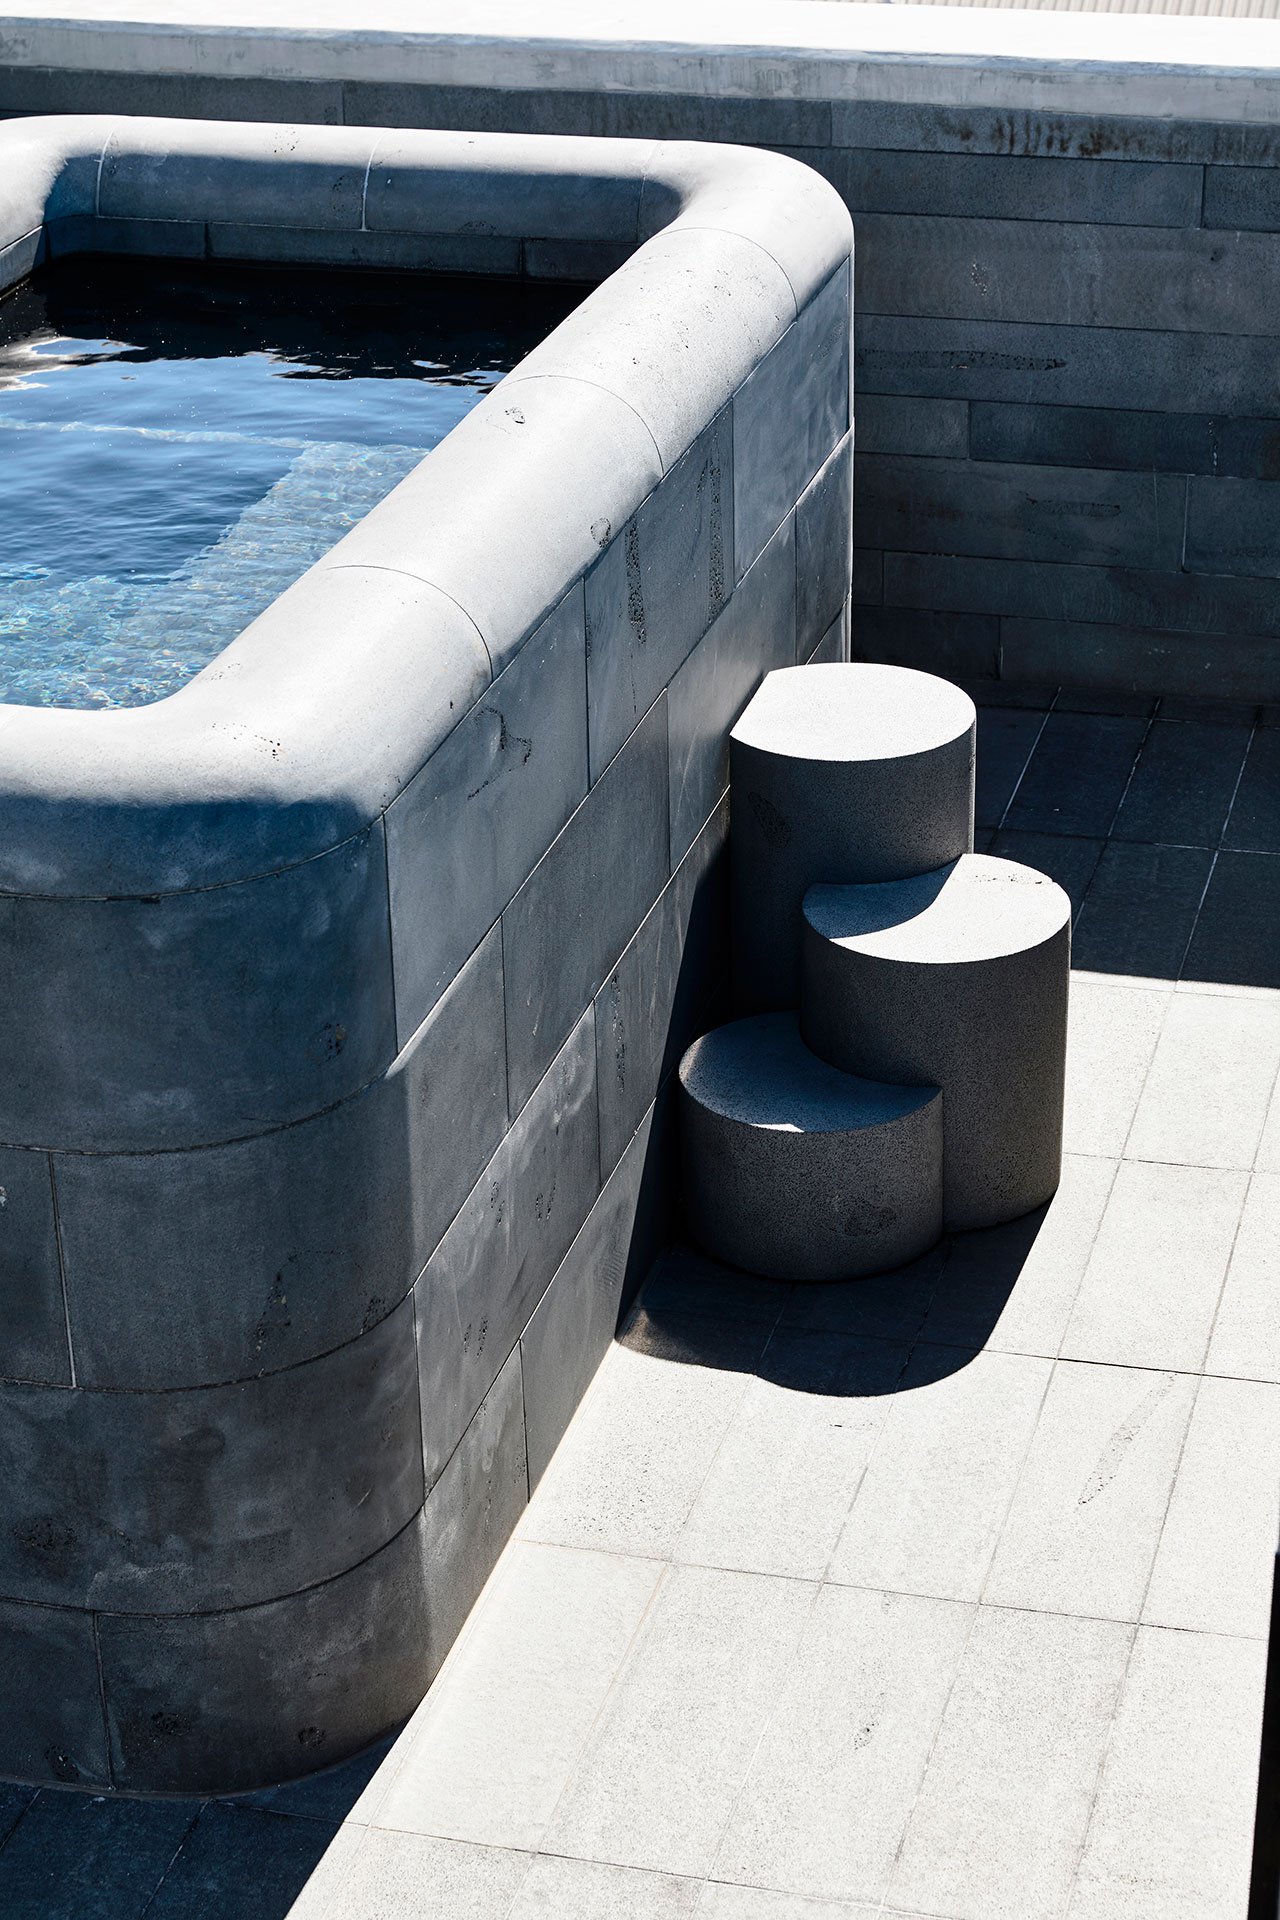 There's also an outdoor stone clad bathtub